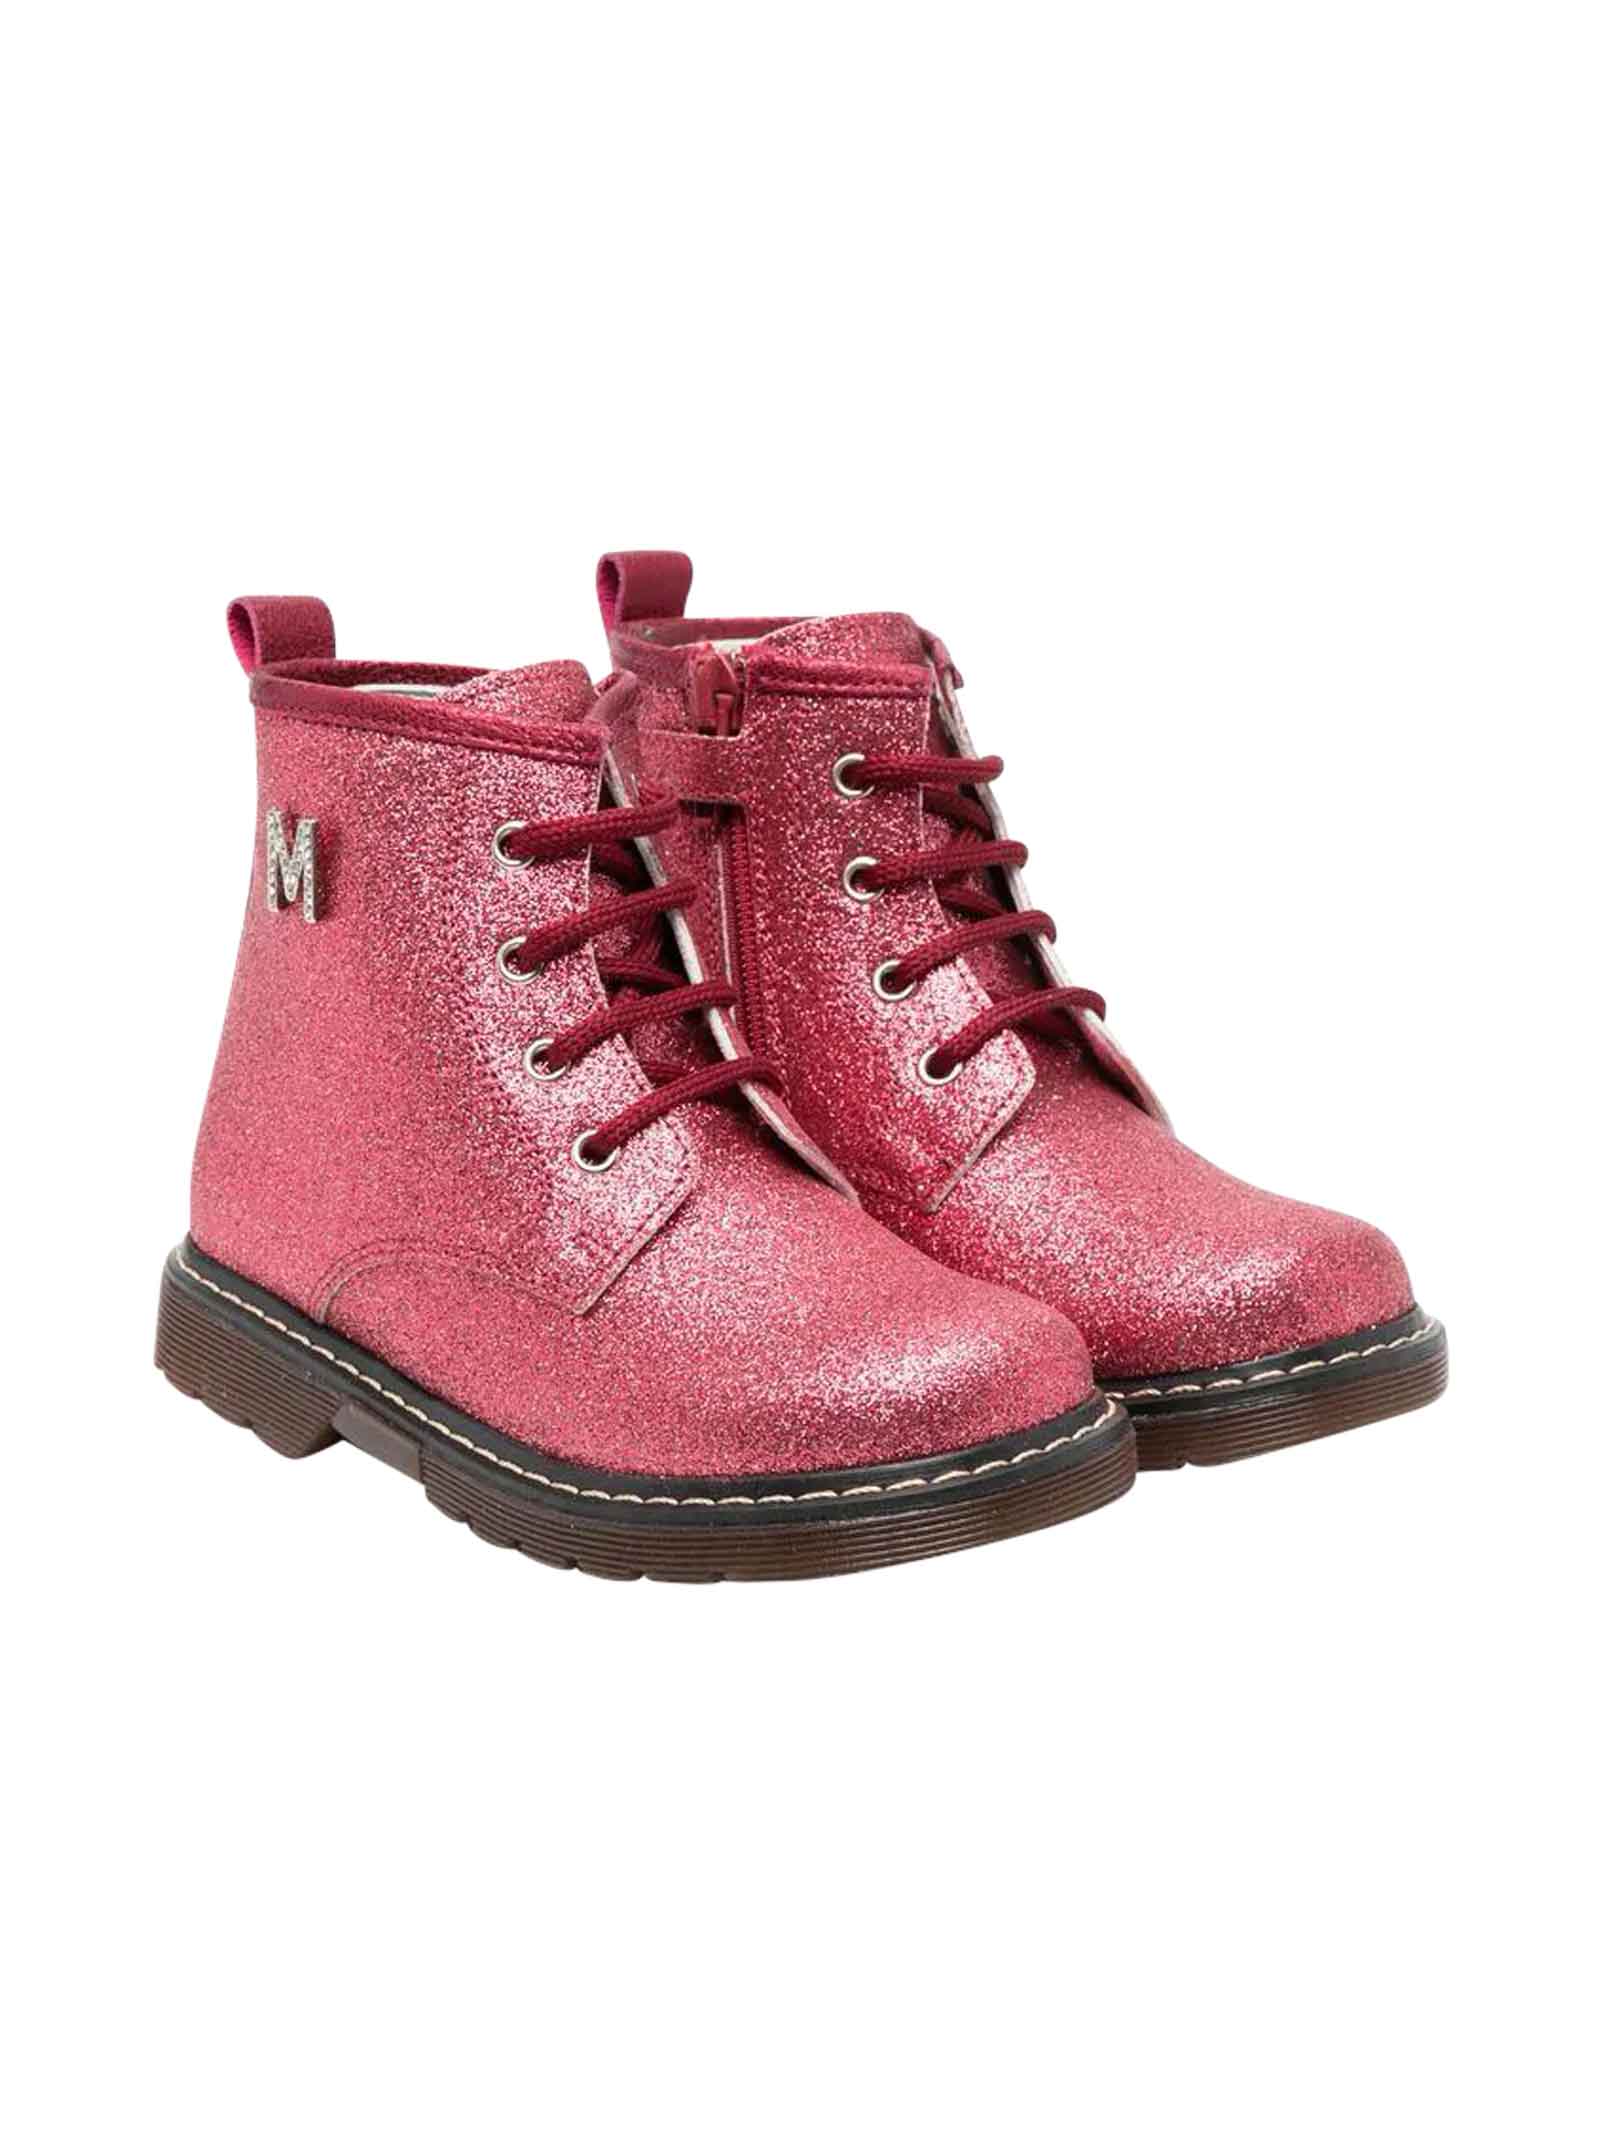 Pink Ankle Boots Girl Monnalisa.